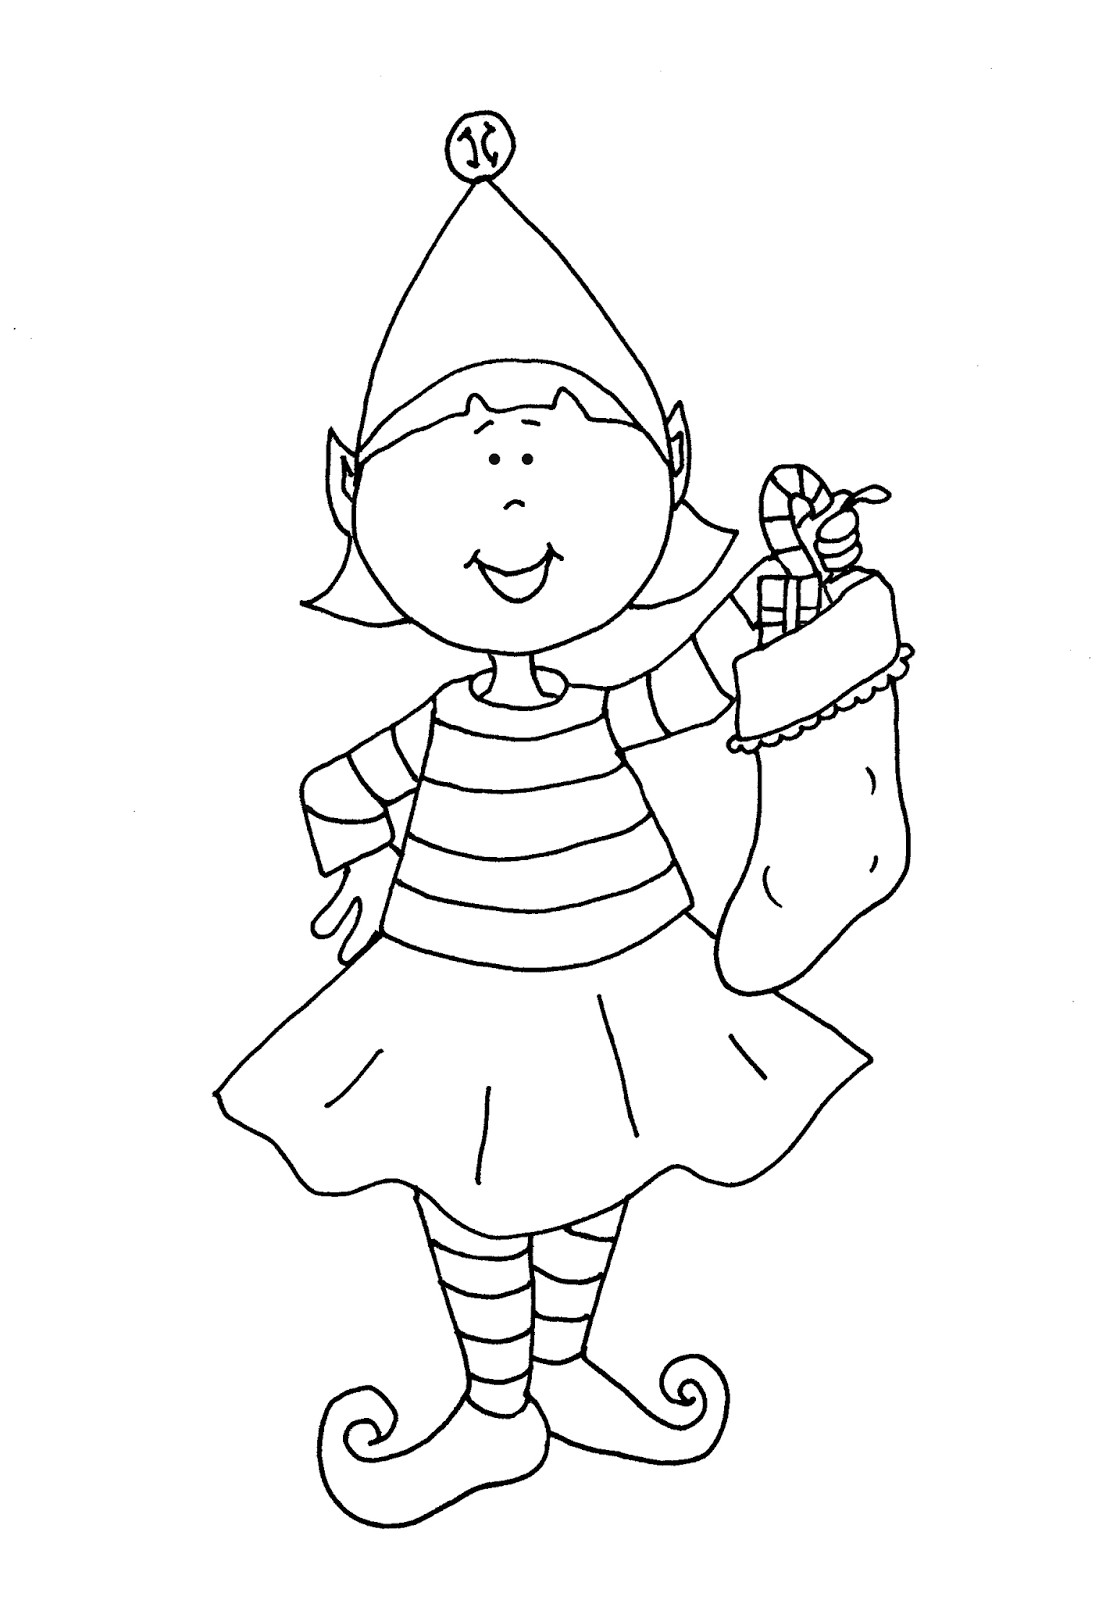 Elf Coloring Pages For Boys
 Cute Elf Coloring Pages AZ Coloring Pages